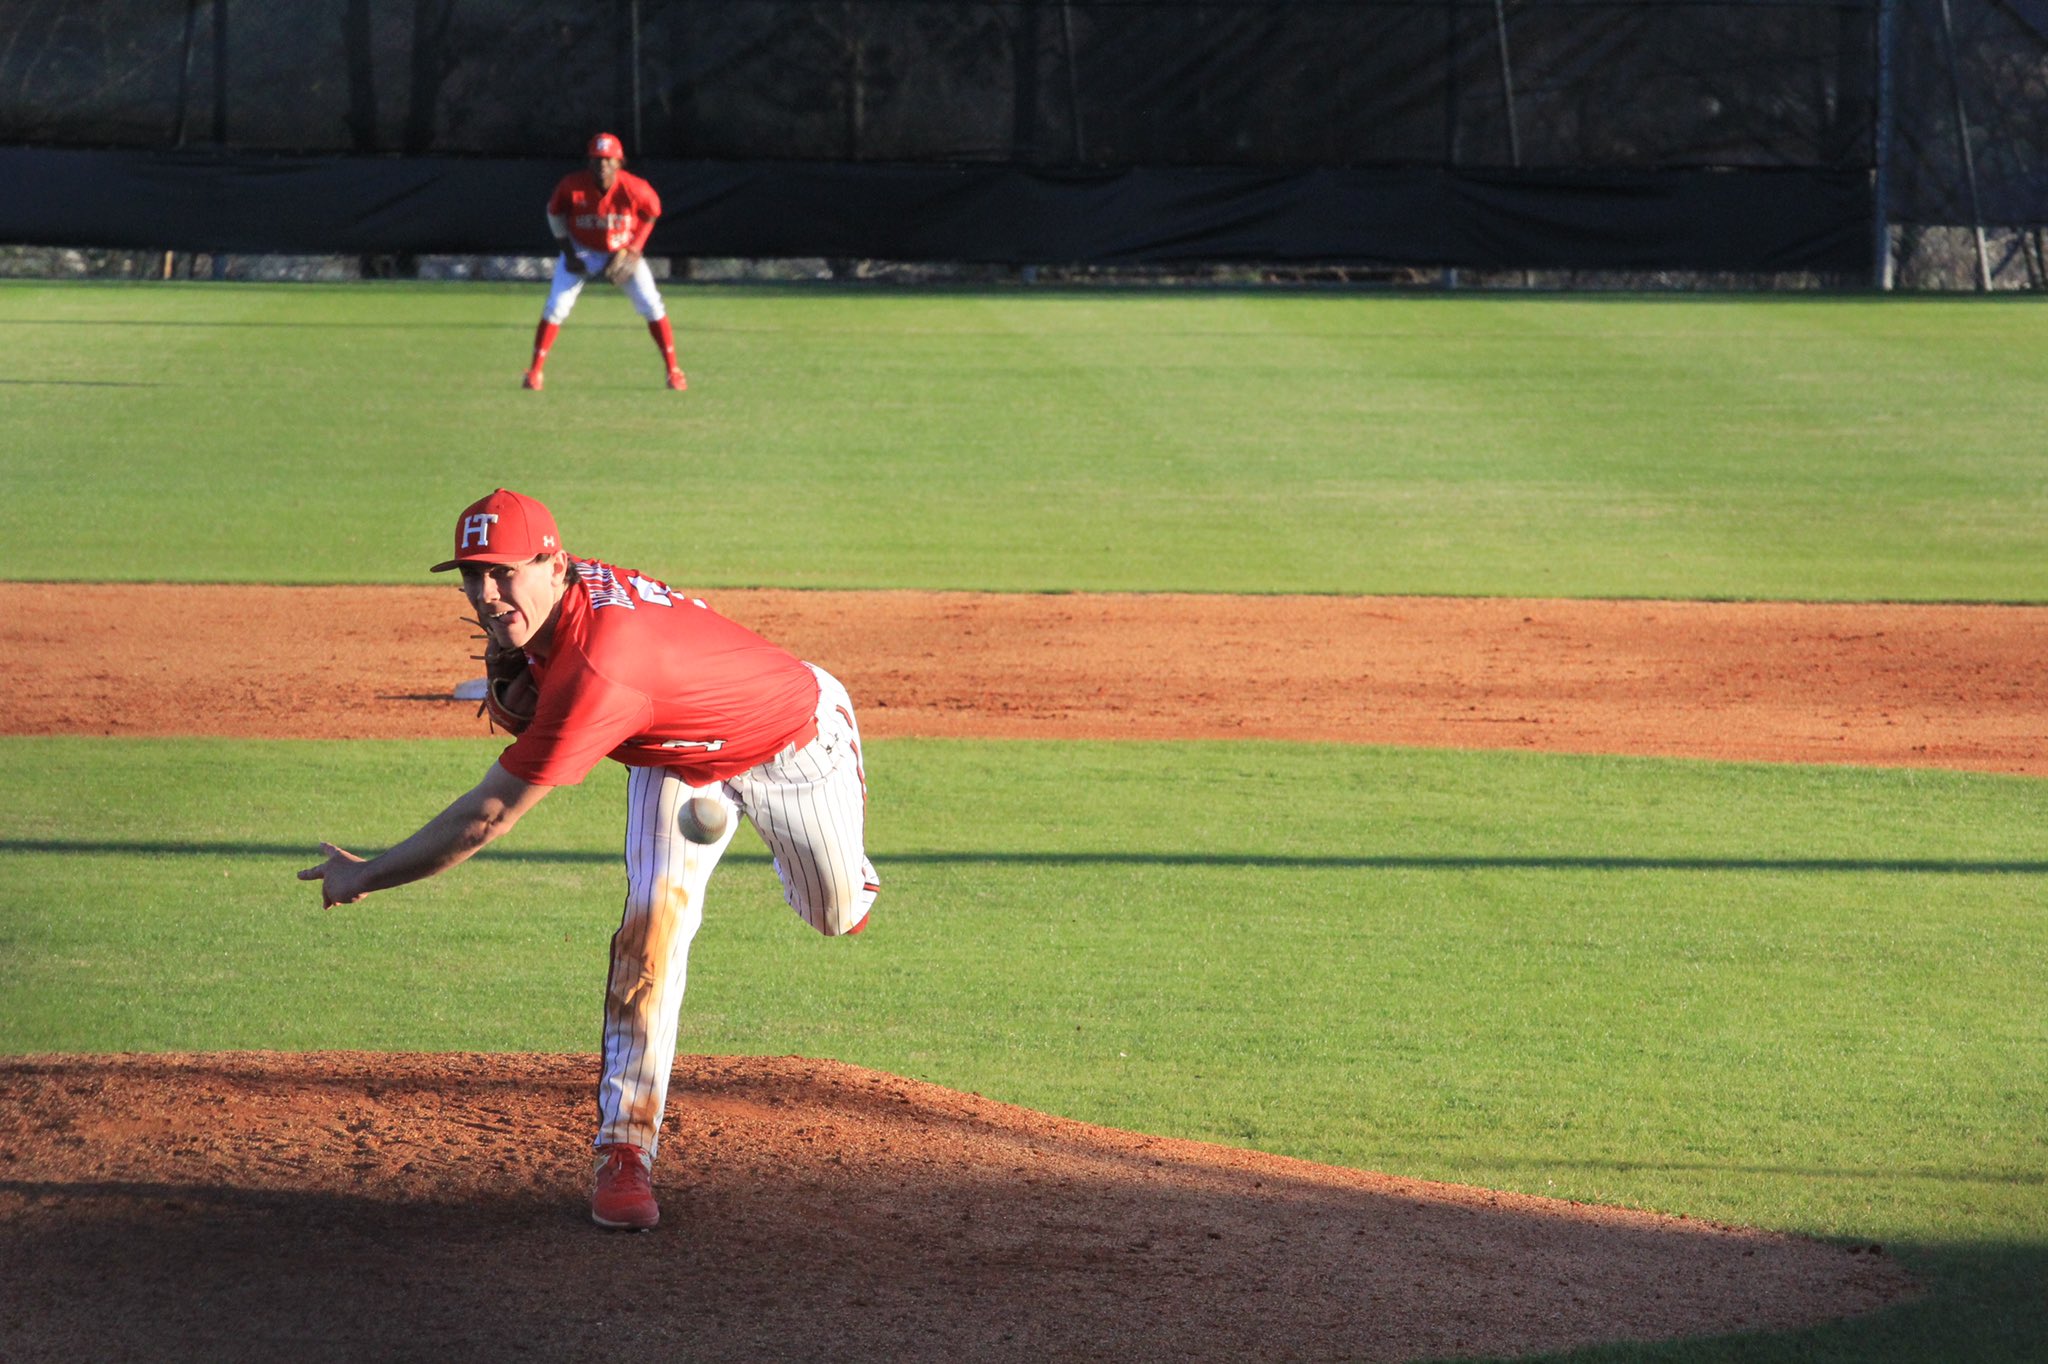 HTHS baseball moves to 8-1 after Saturday's double-header sweep of Sylacauga, Pelham